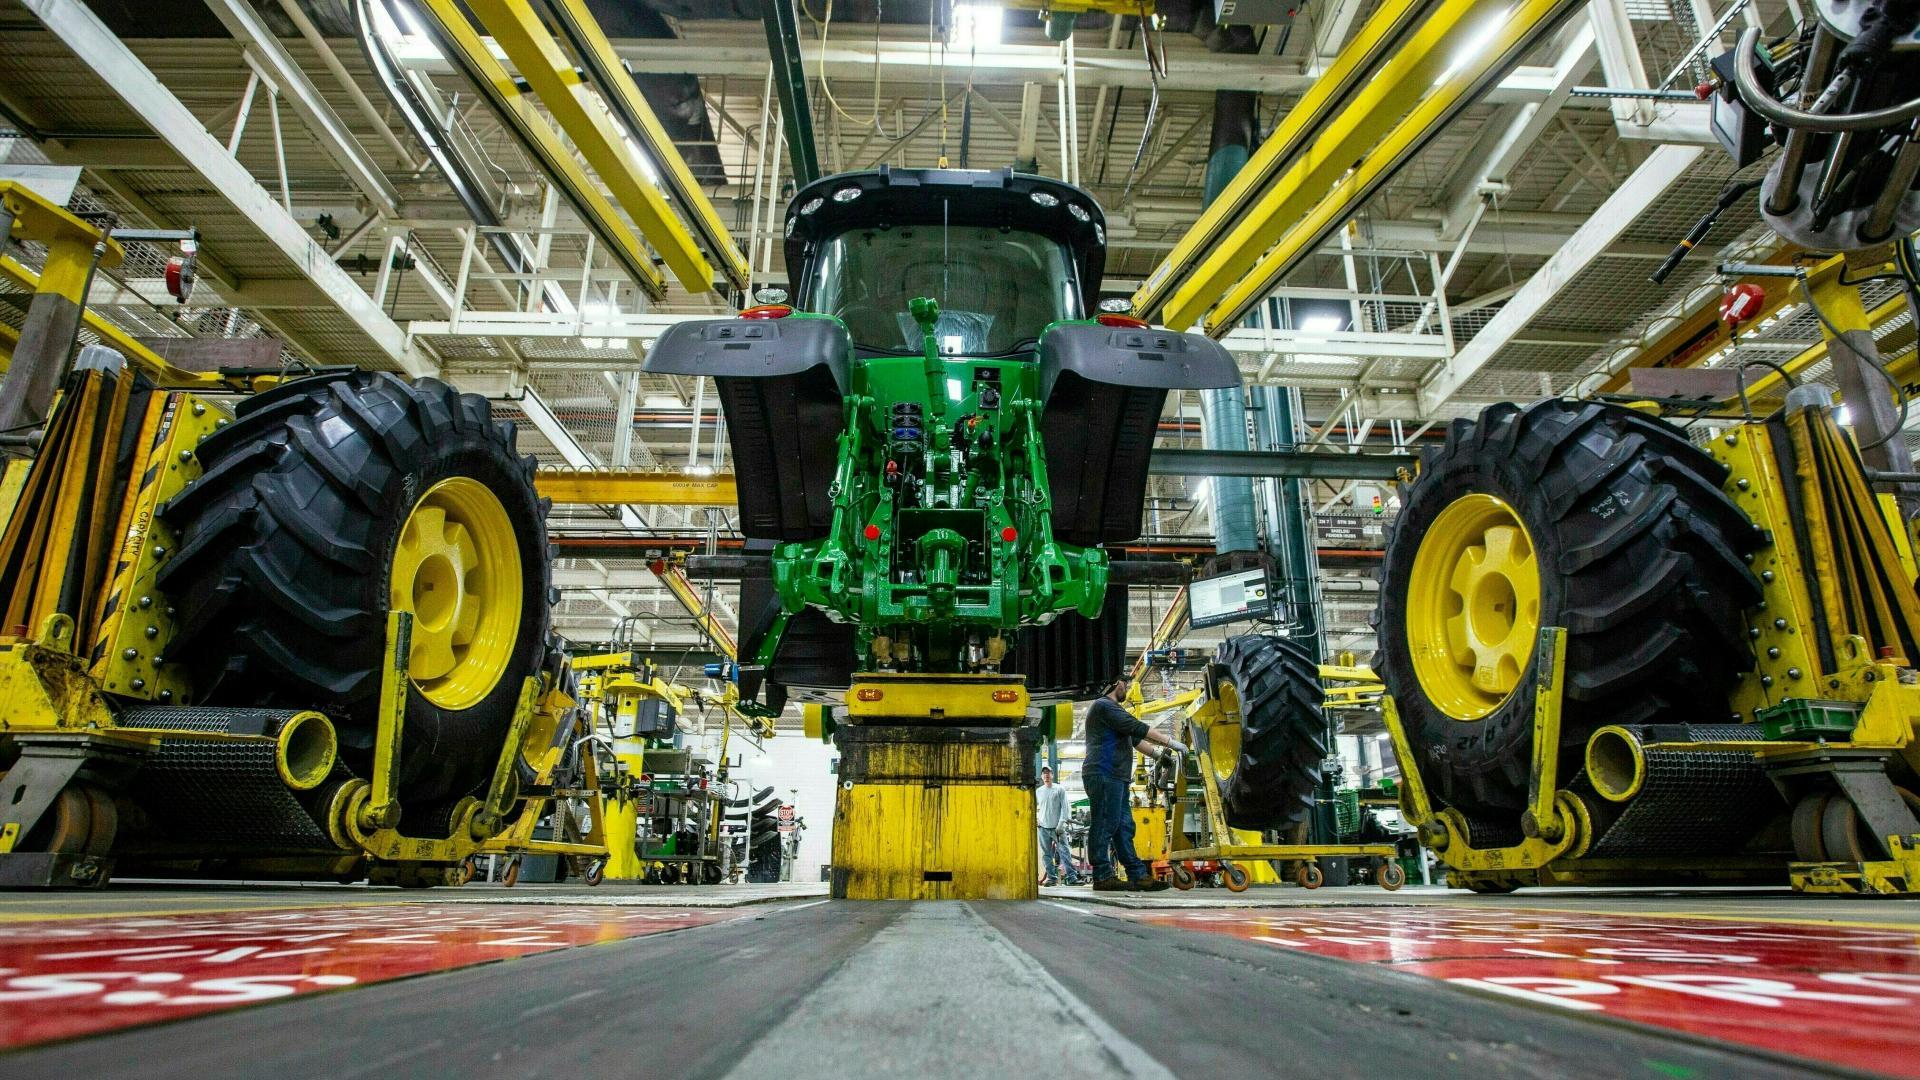 In this April 9, 2019, wheels are attached as workers assemble a tractor at John Deere's Waterloo, Iowa assembly plant. (Zach Boyden-Holmes / Telegraph Herald via AP, File)